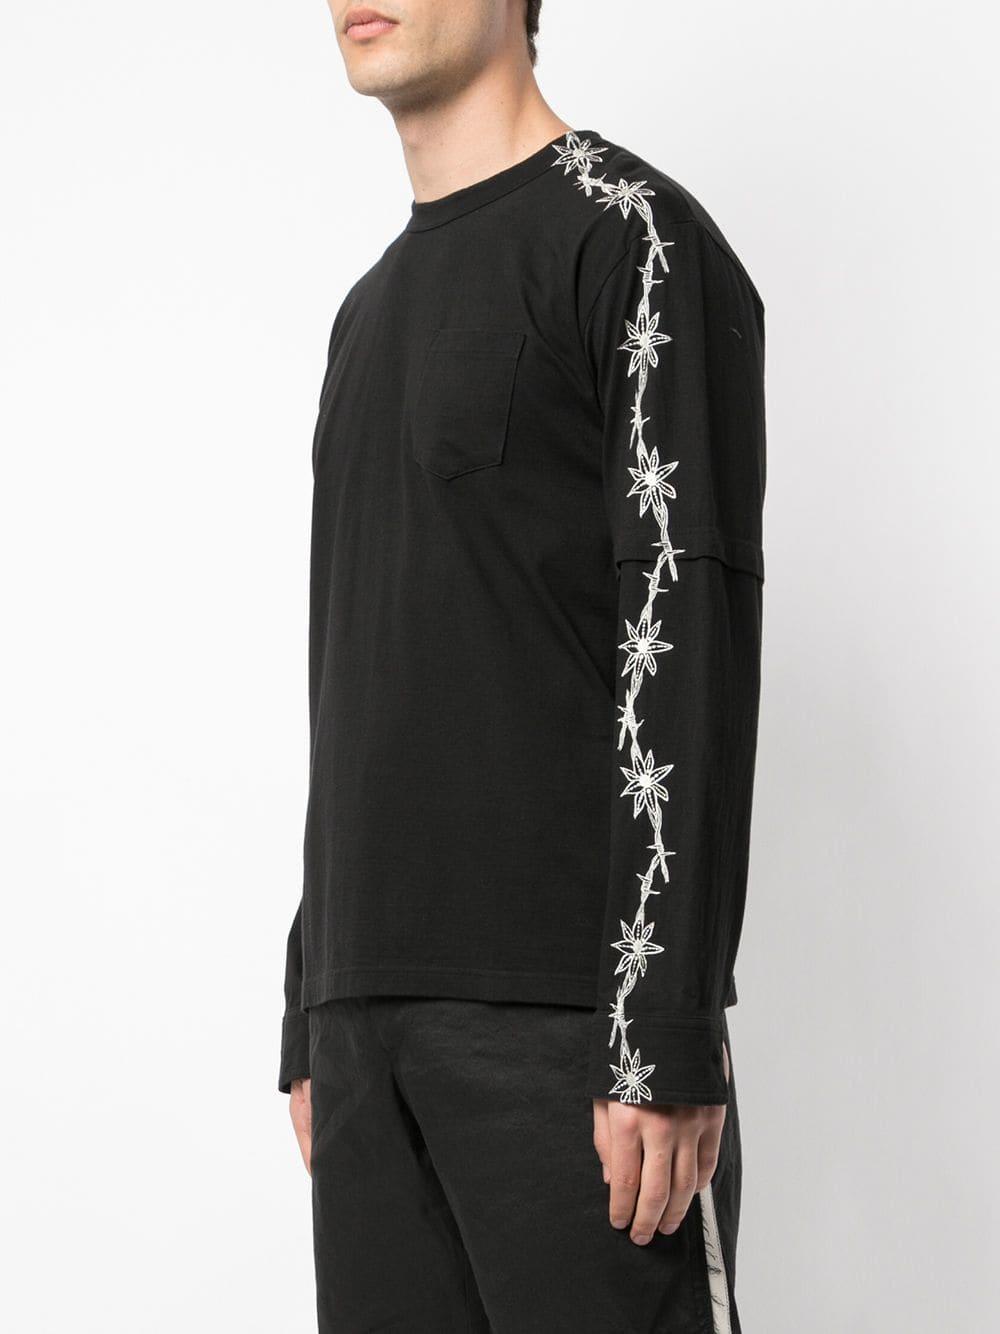 Sacai Cotton Layered T-shirt in Black for Men - Lyst